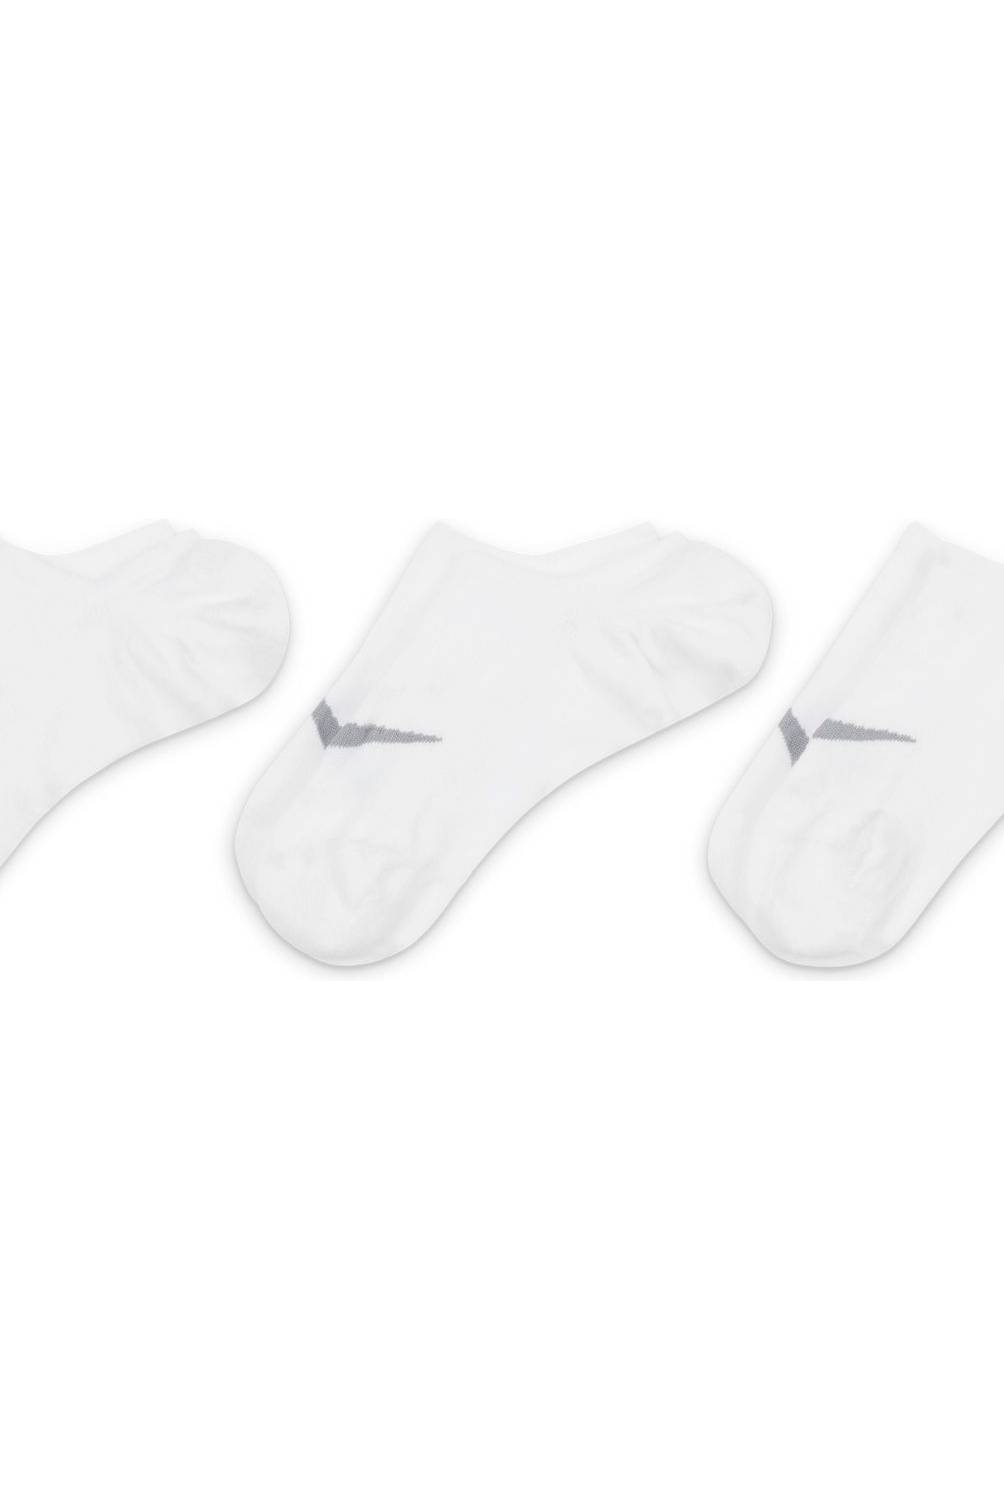 NIKE Pack De 3 Calcetines Invisibles Deportivos Mujer Nike